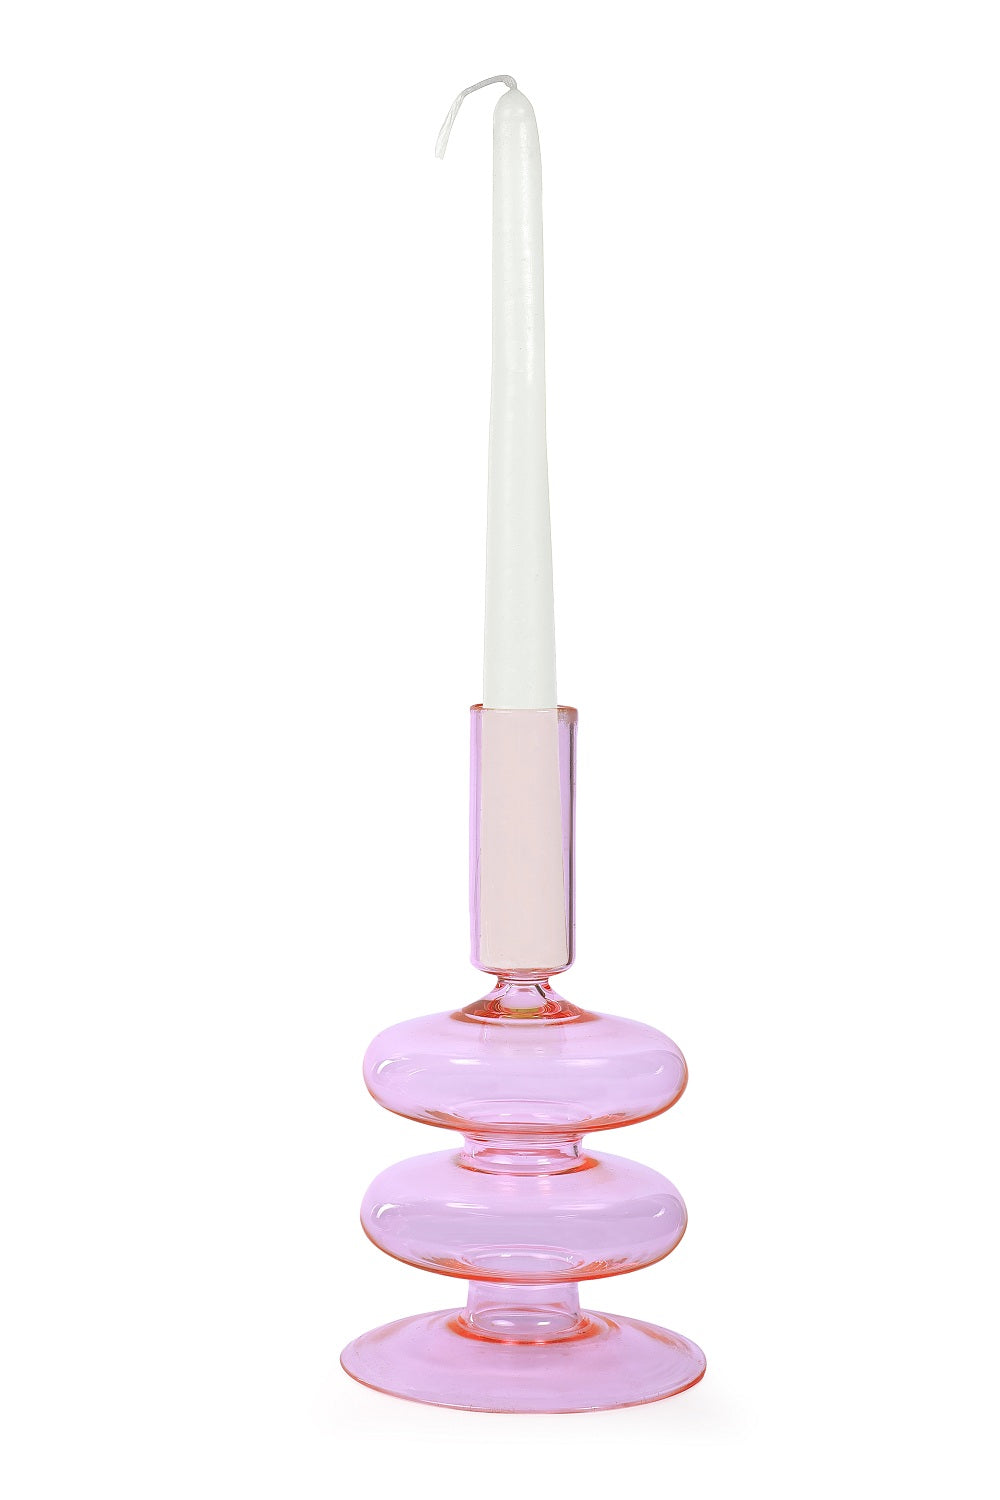 Retro Wavy Glass Candle Holder- 7 x3.5 Inches_Pink (Set of 4)